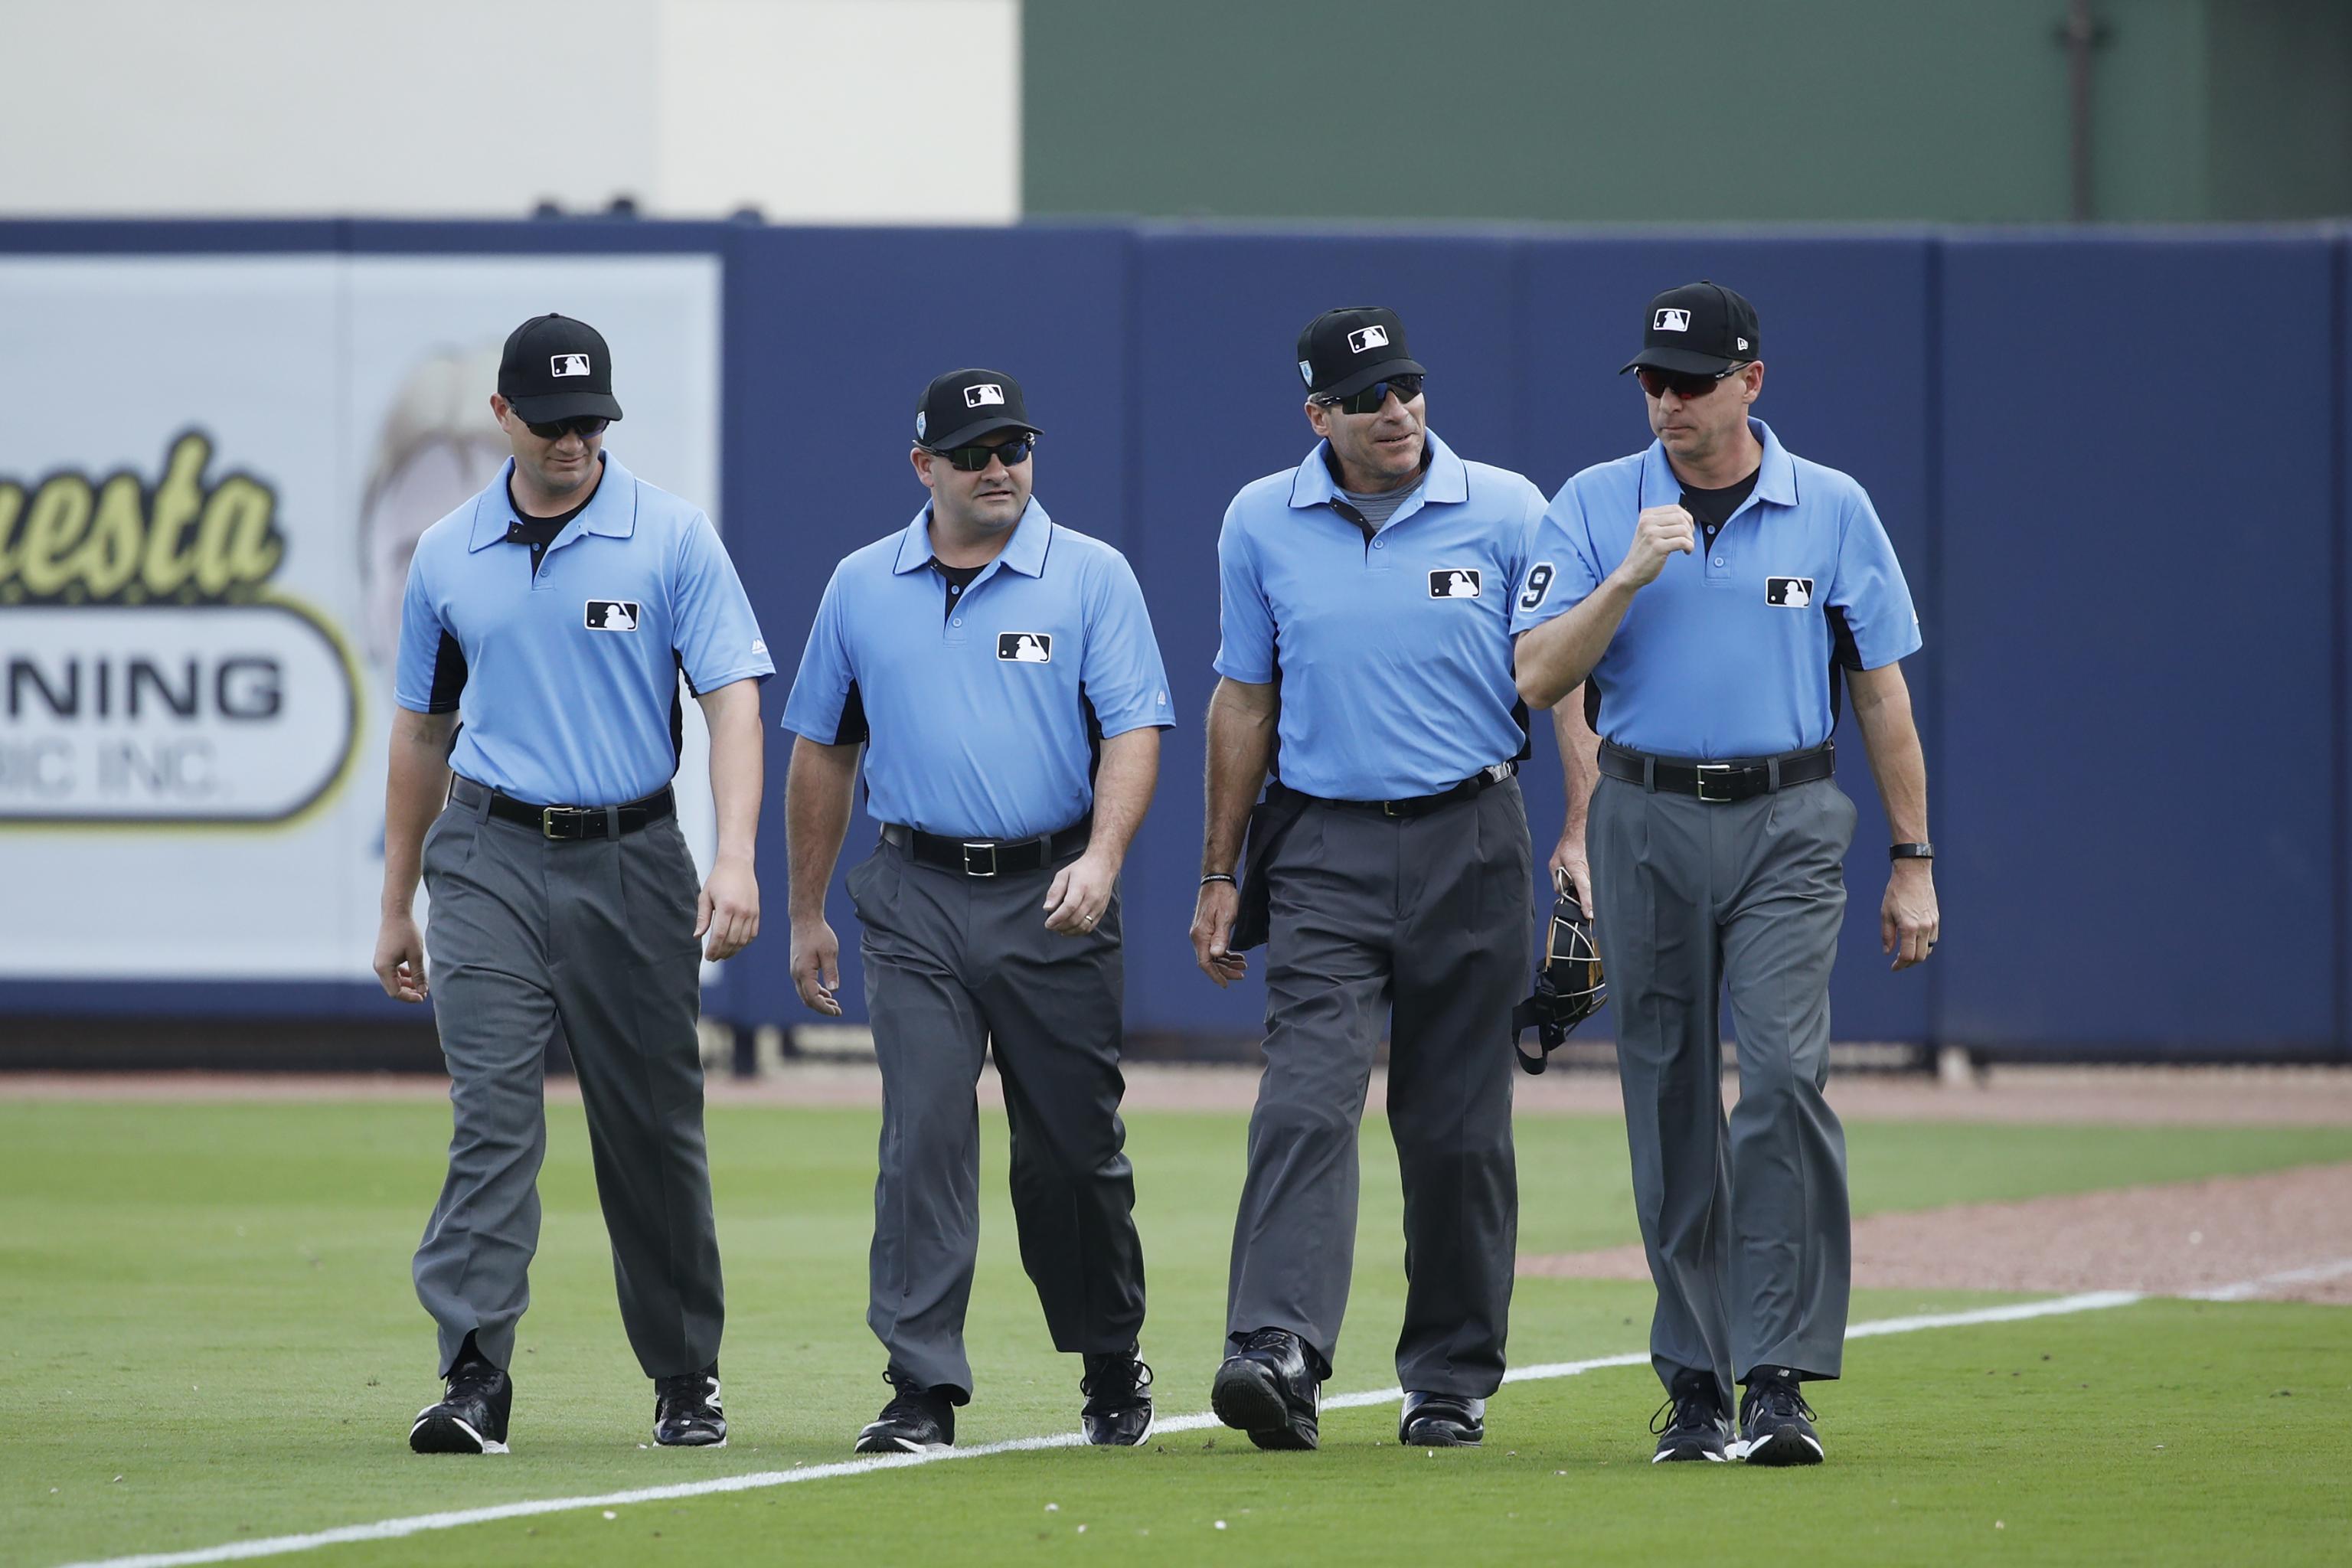 MLB, Atlantic League push back two experimental playing rules and equipment  initiatives